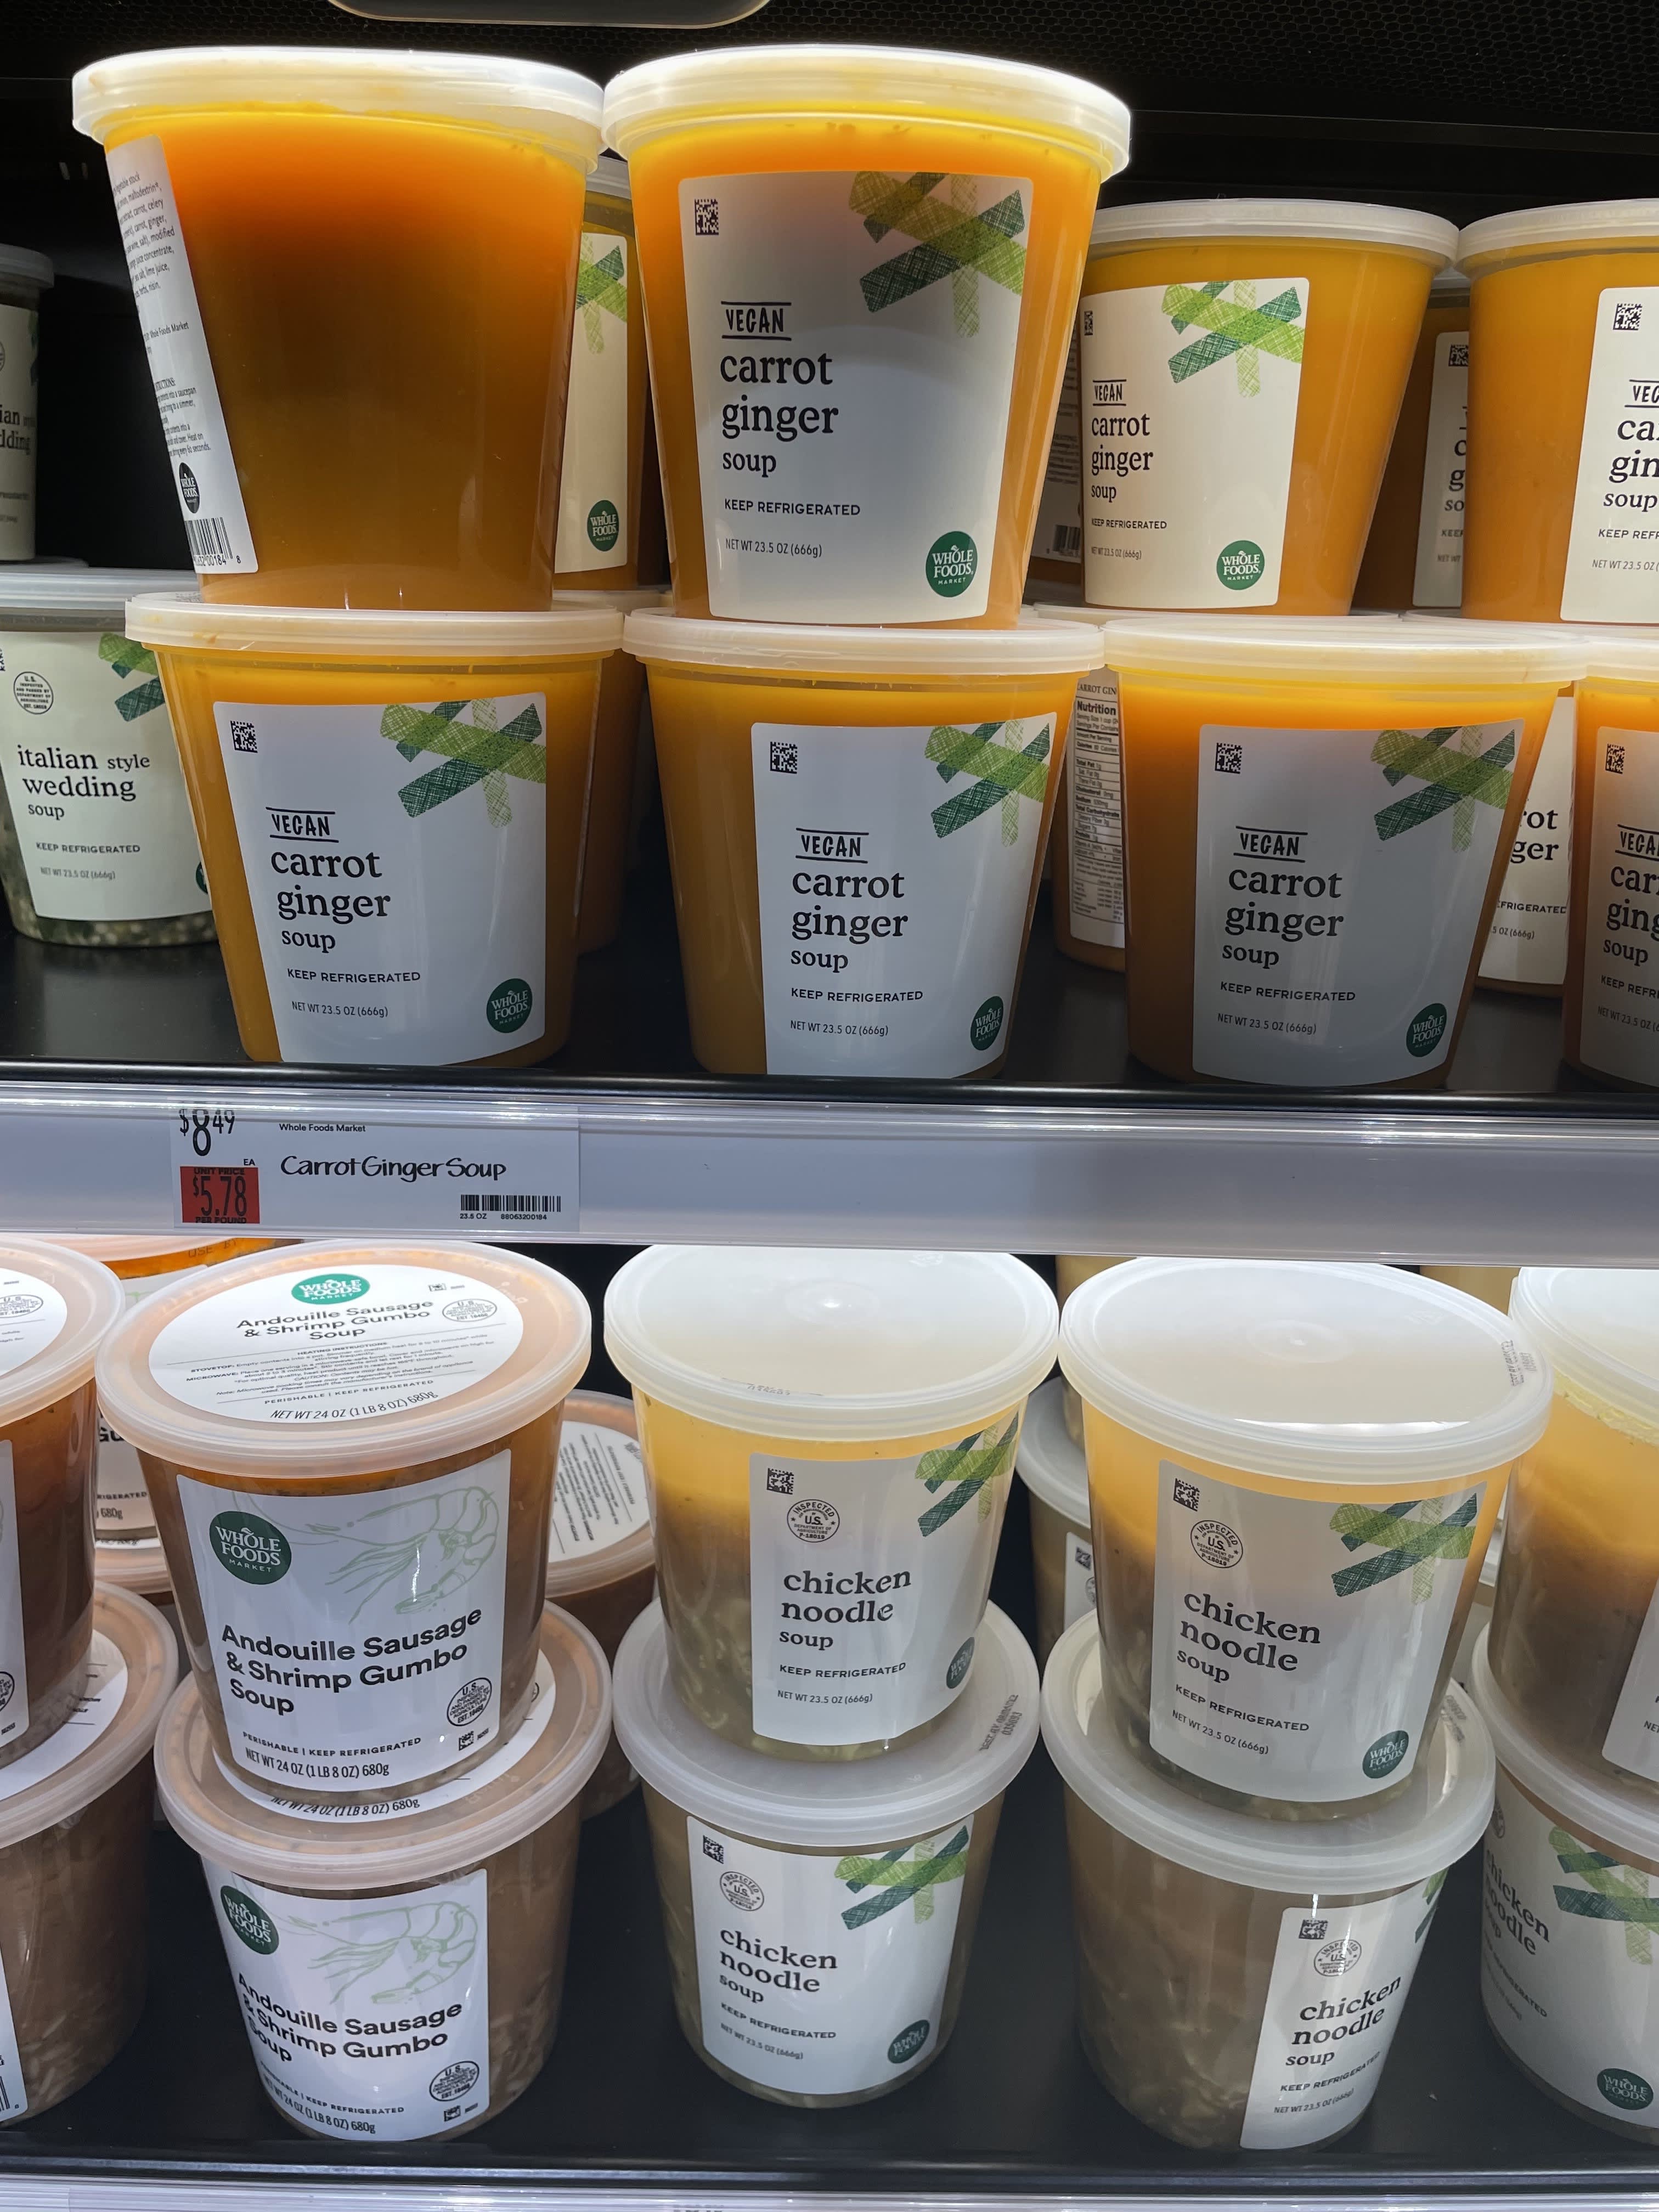 Prepared Soups & Salads at Whole Foods Market